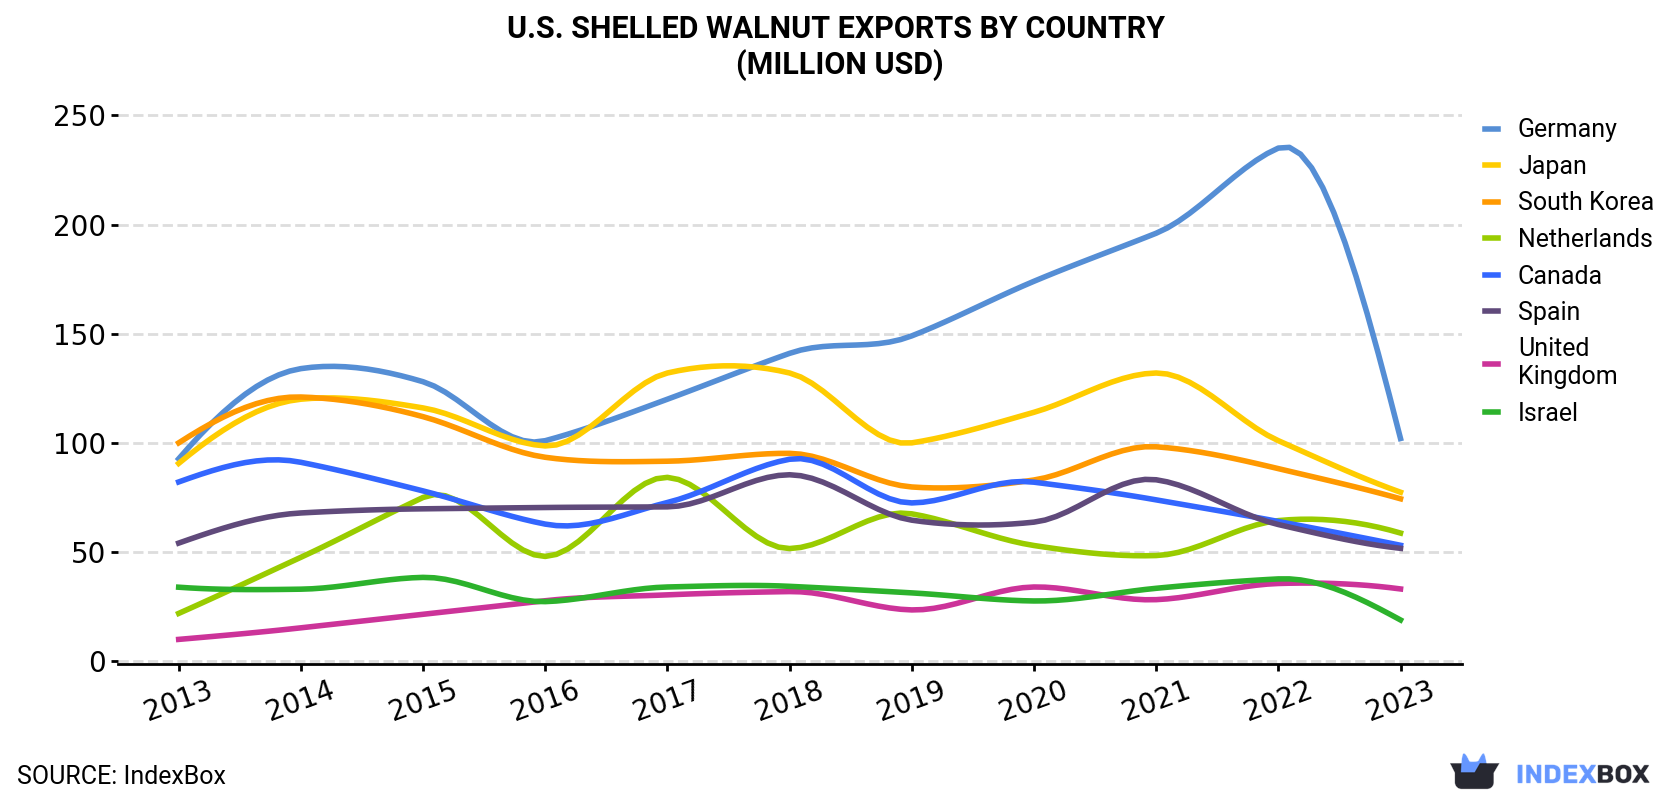 U.S. Shelled Walnut Exports By Country (Million USD)